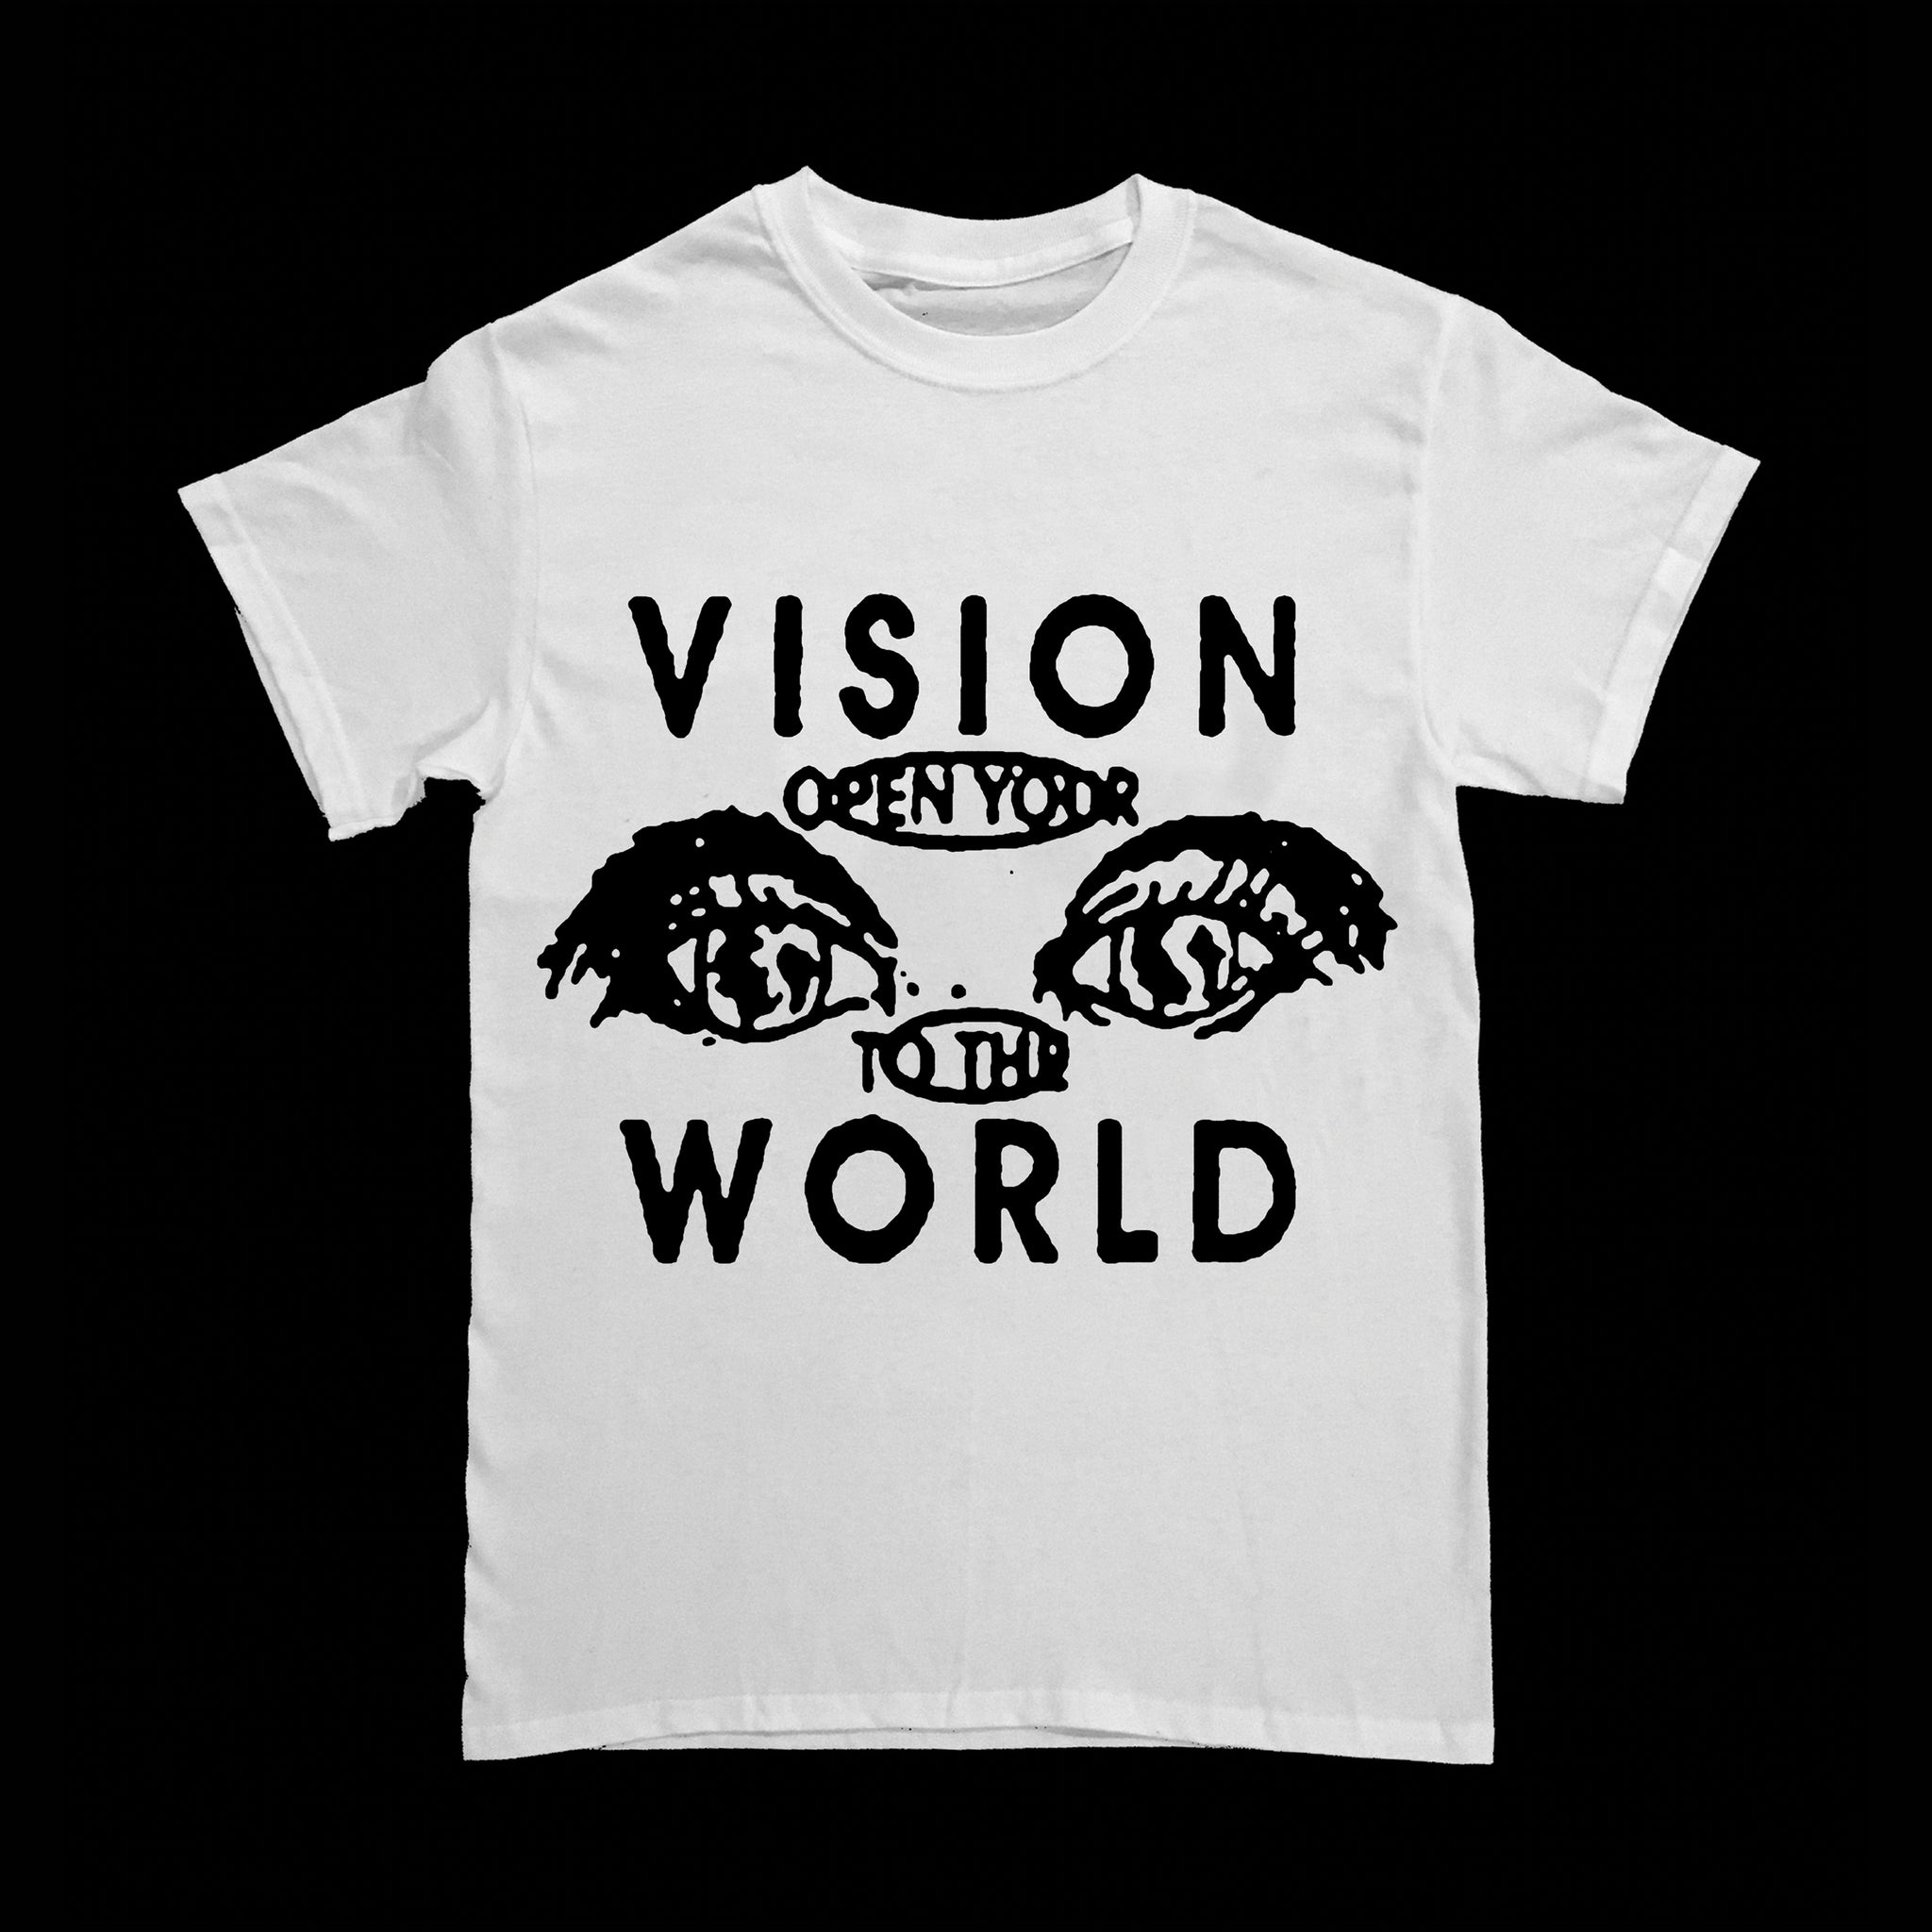 "Open Your Eyes to the World" T-shirt by Jen Shear